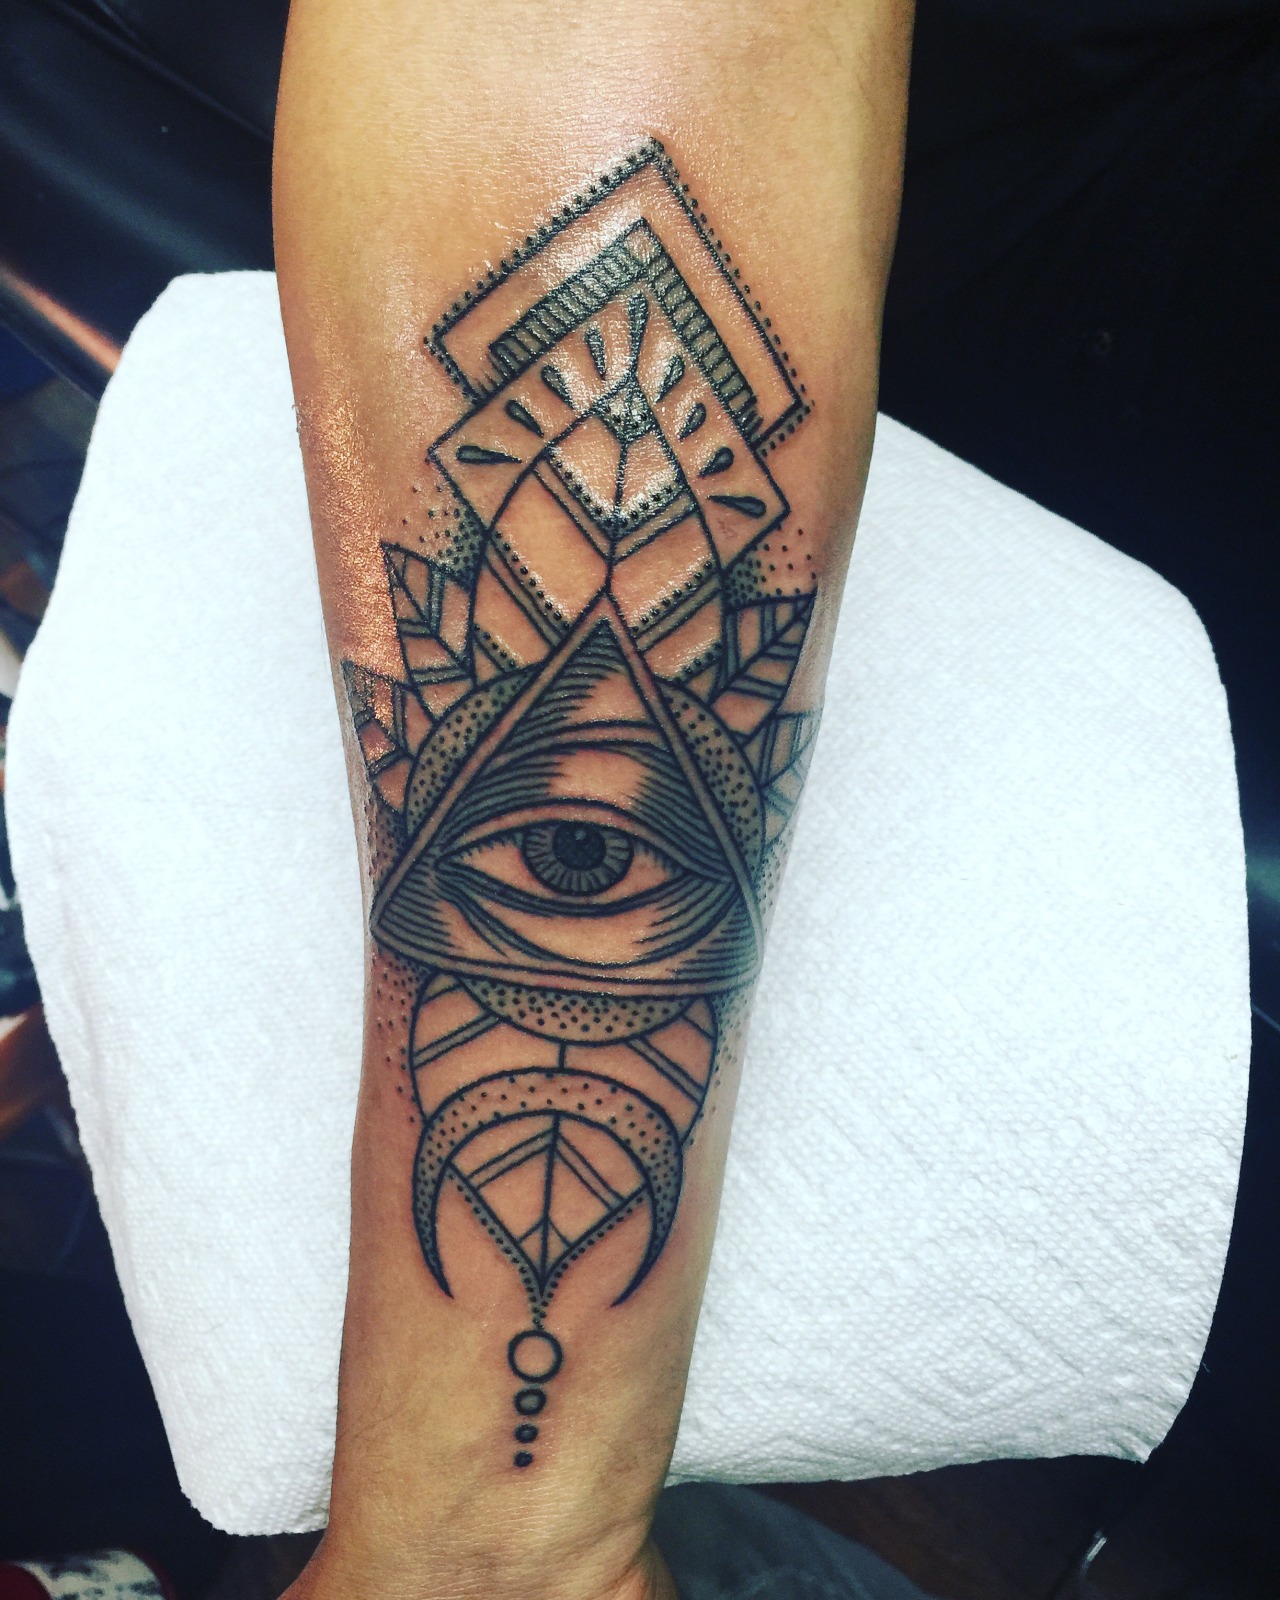  — Tattoo by Cat Castro at the Madd Tatterz in...